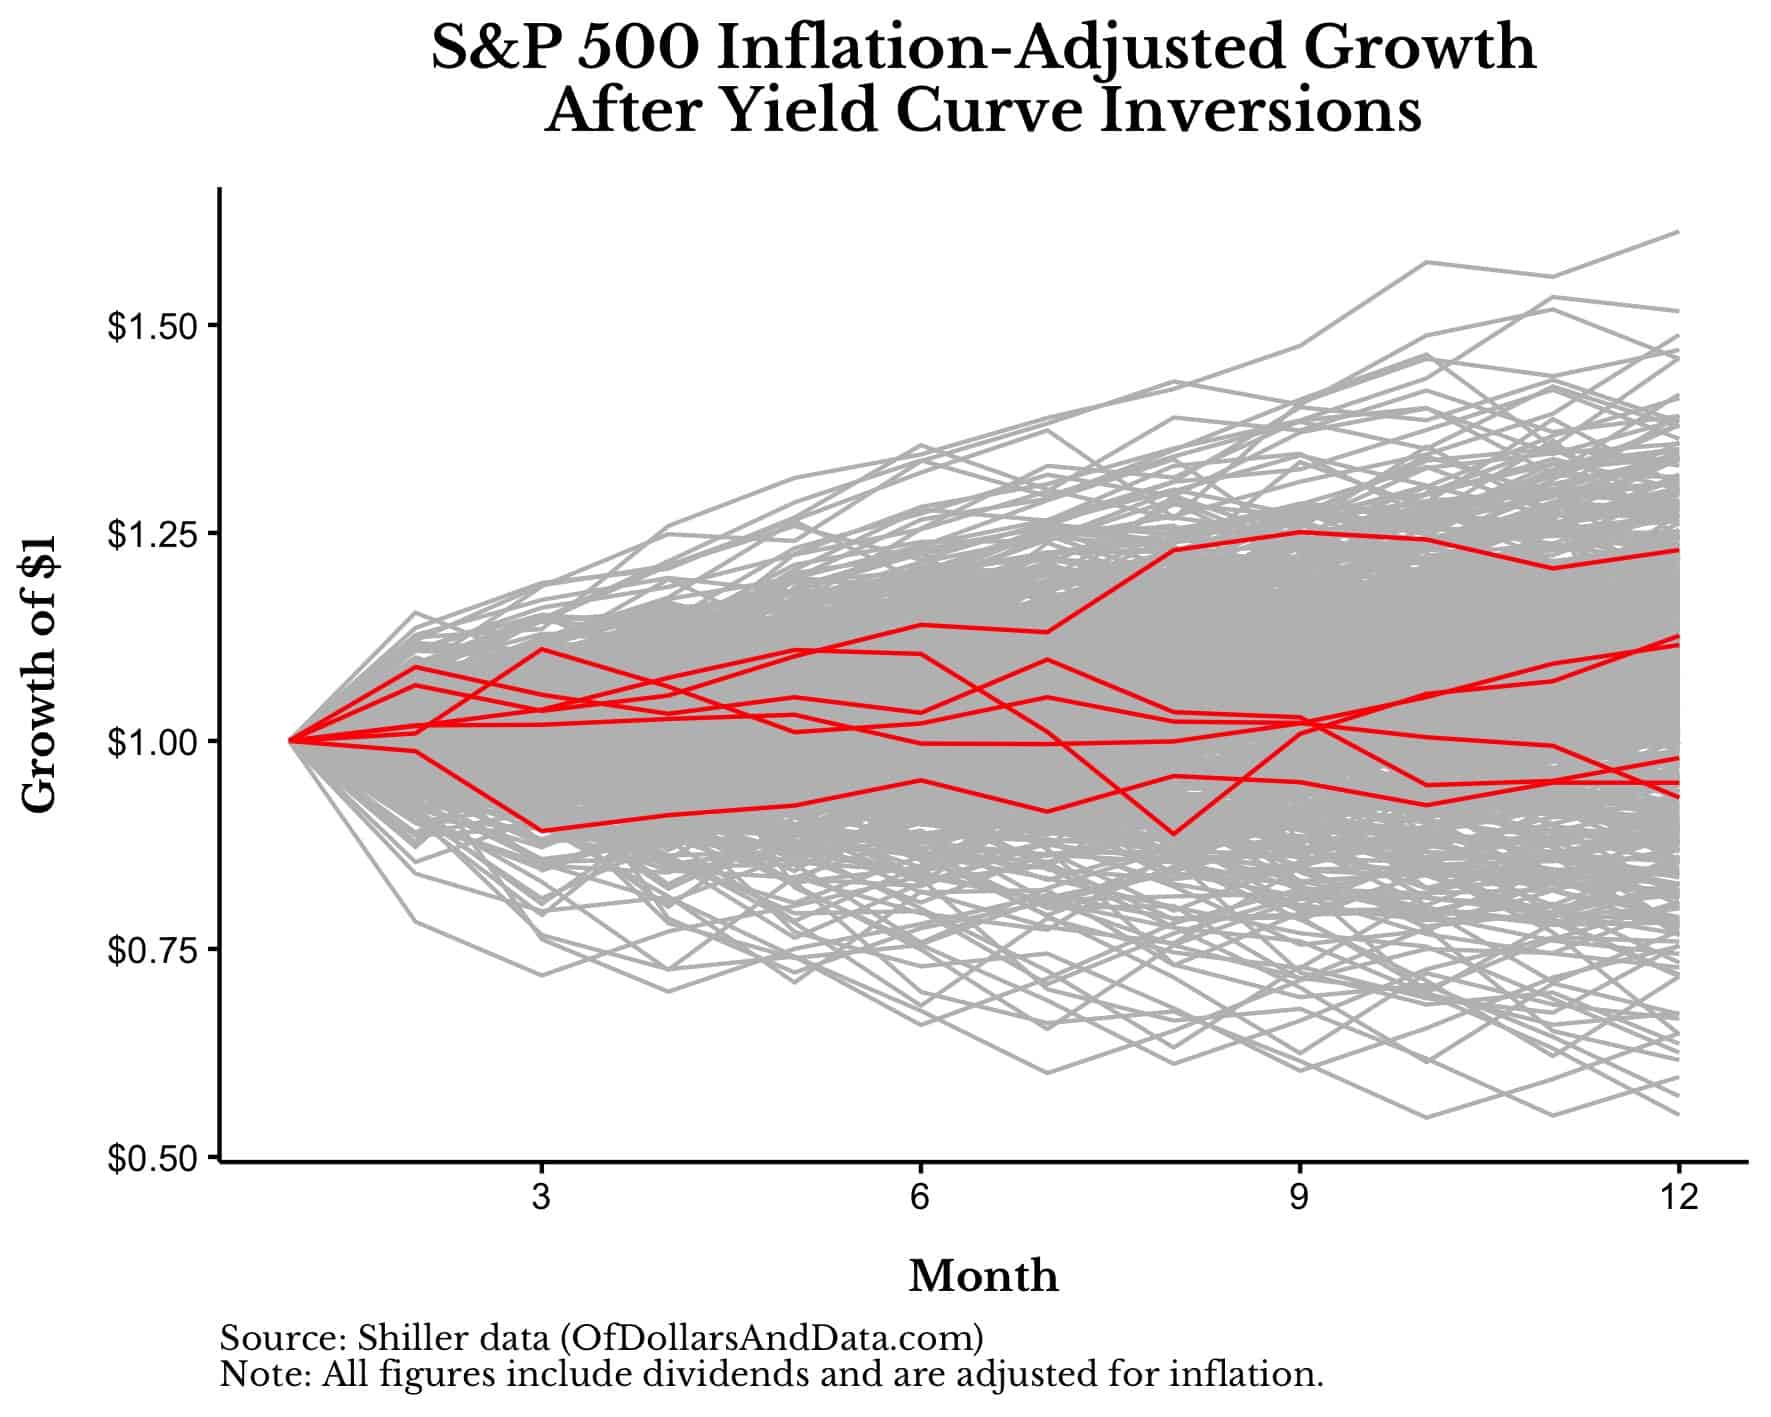 S&P 500 inflation-adjusted 12-month growth after yield curve inversions